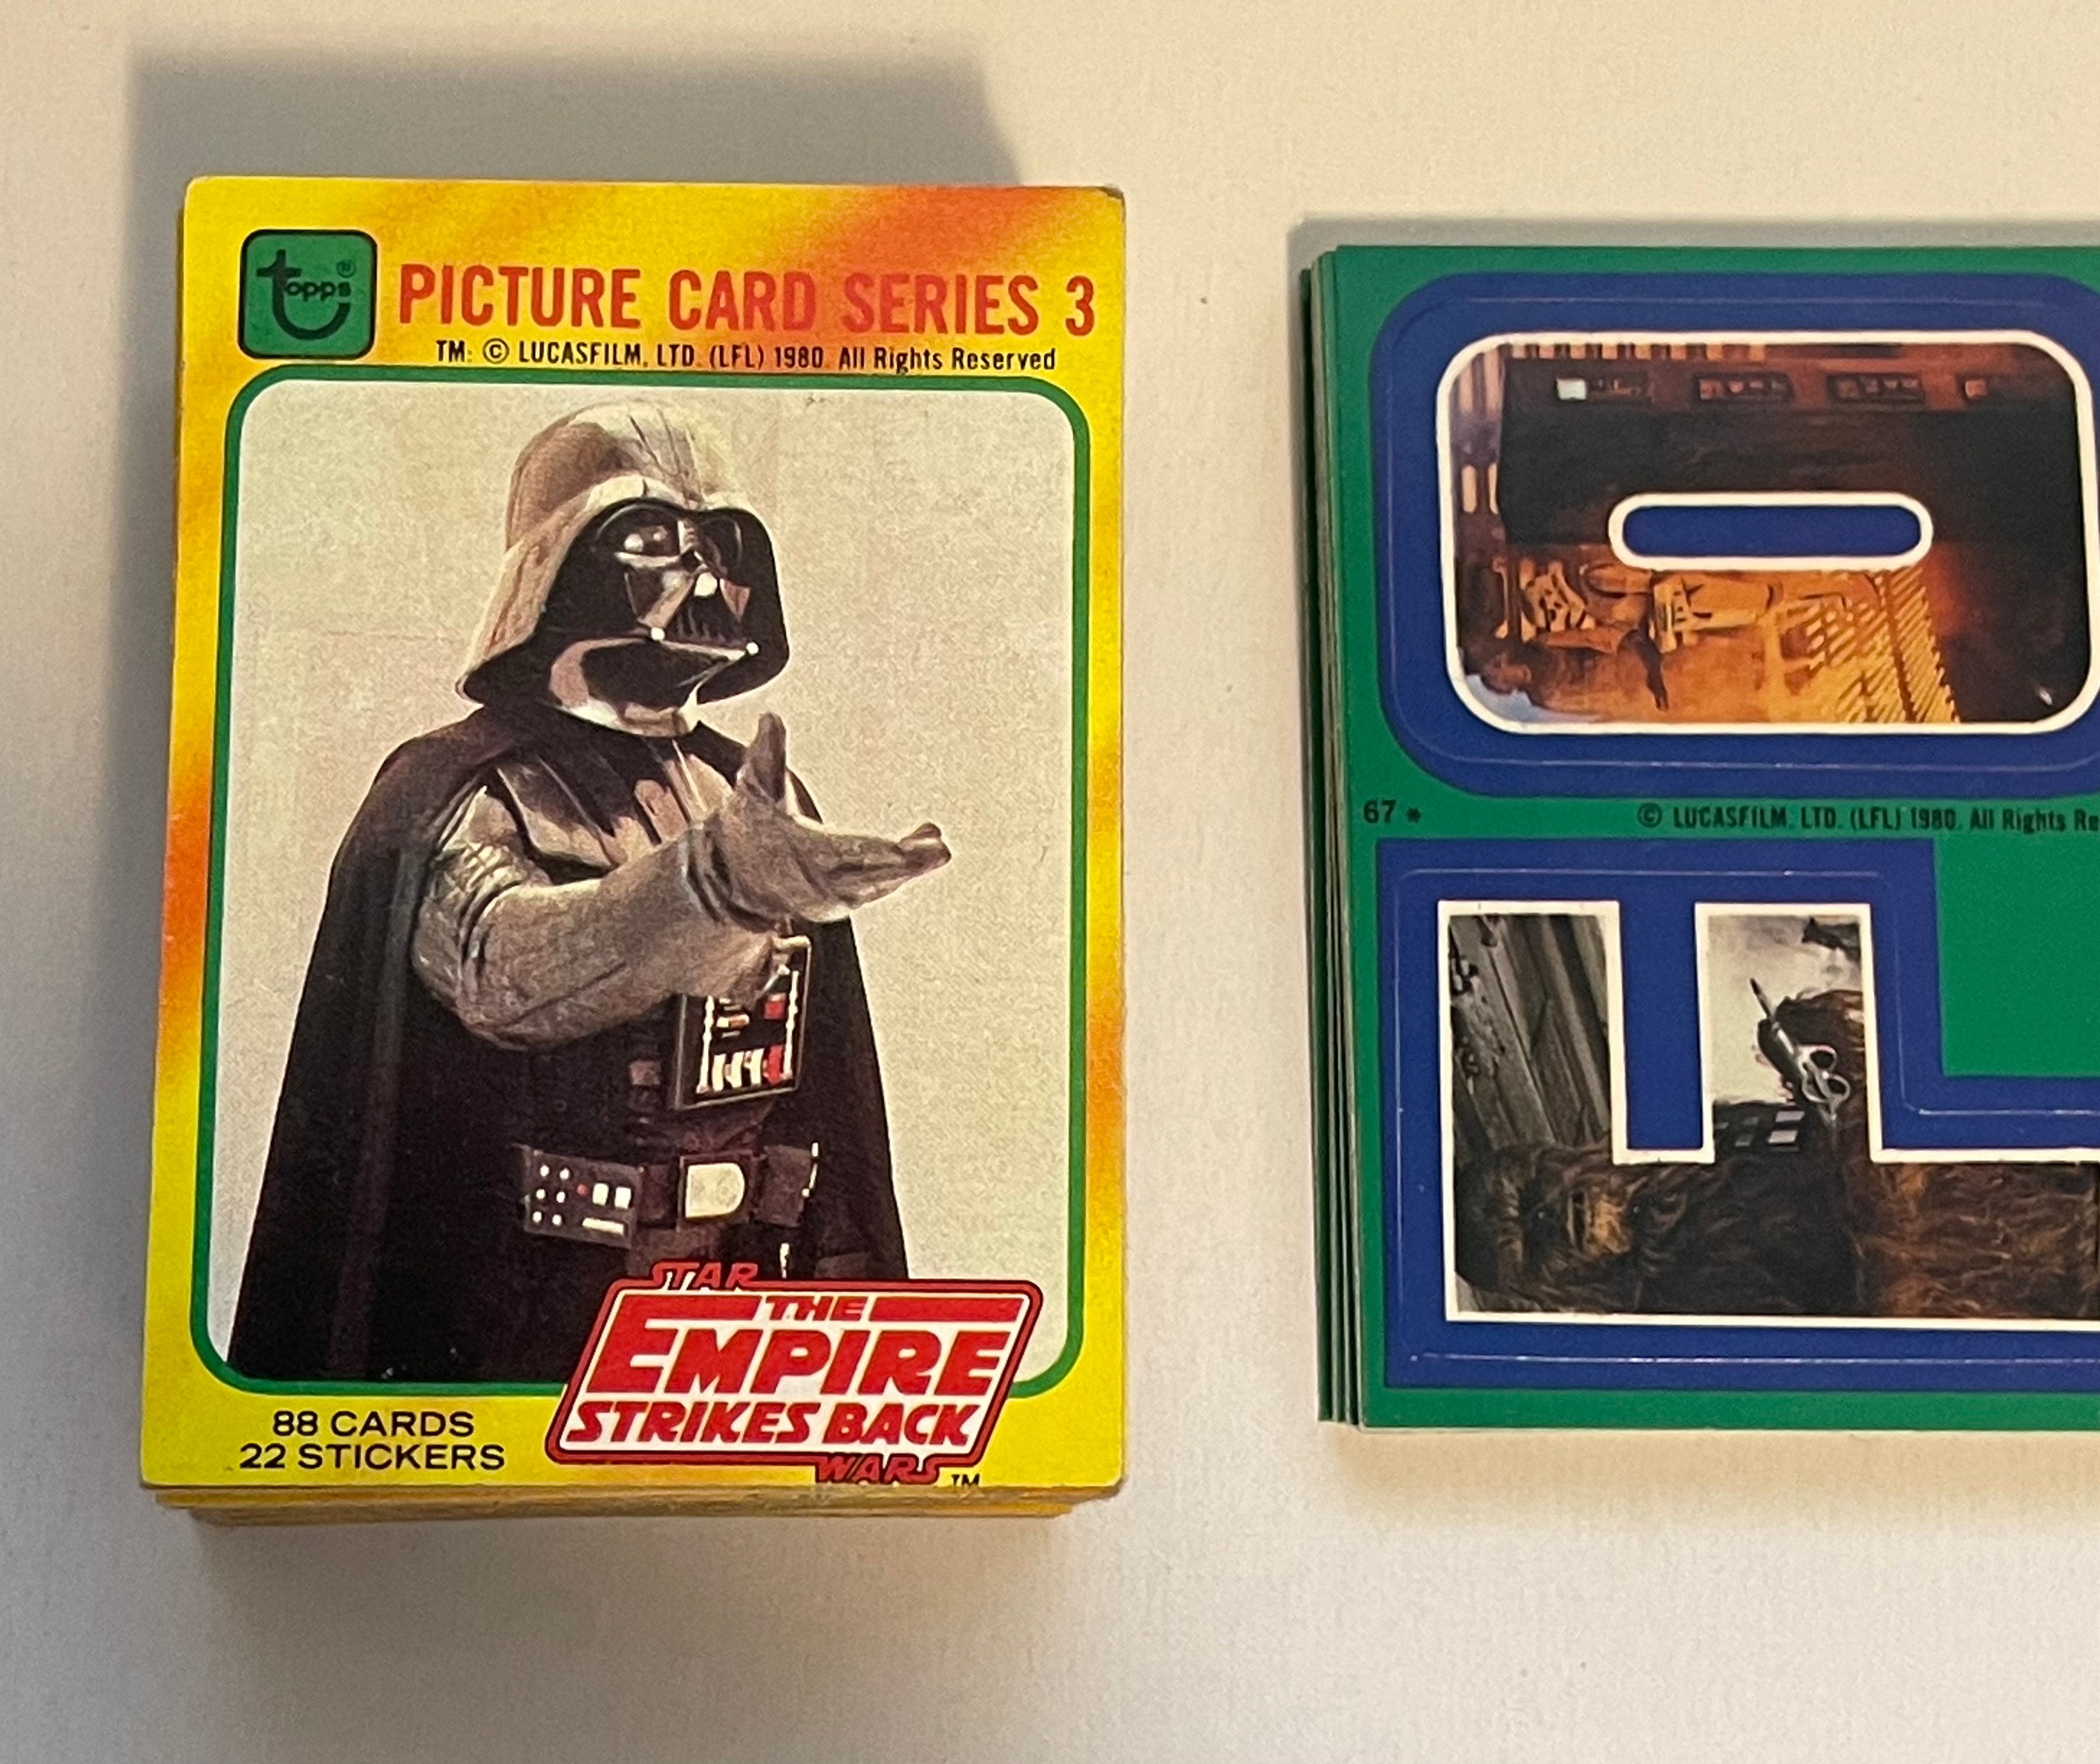 Star Wars Empire Strikes Back series 3 cards and stickers set 1981